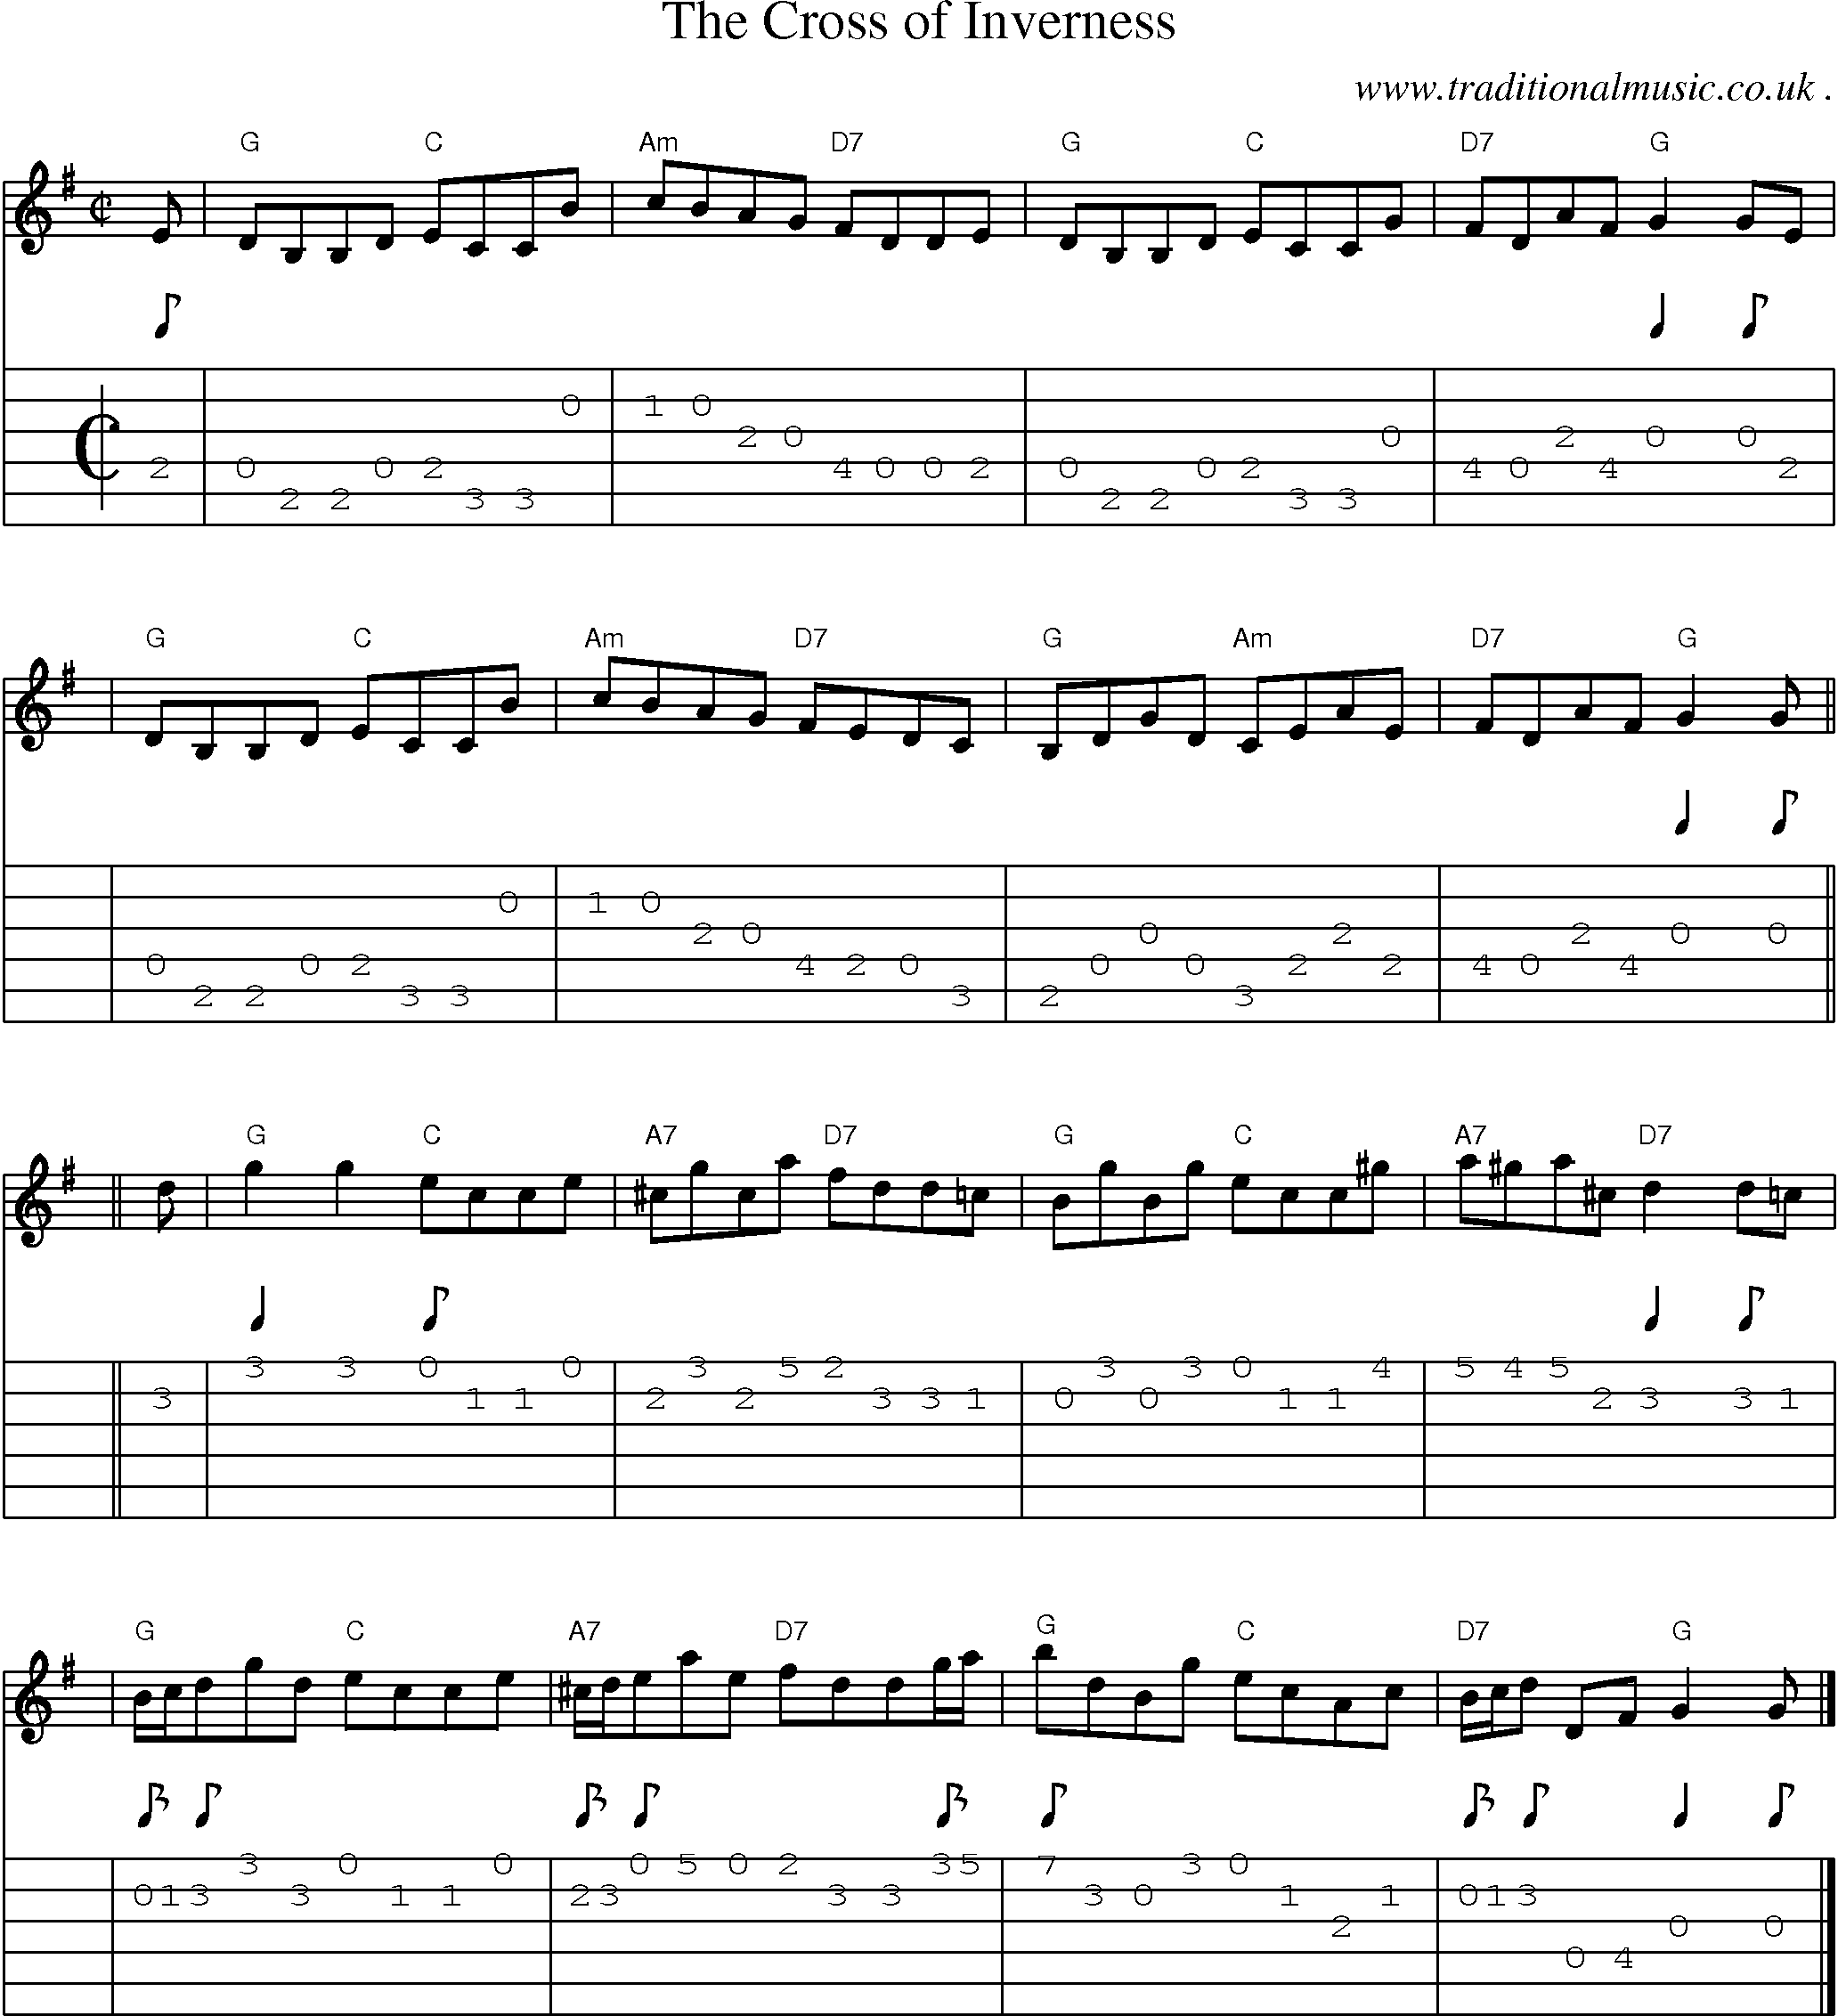 Sheet-music  score, Chords and Guitar Tabs for The Cross Of Inverness